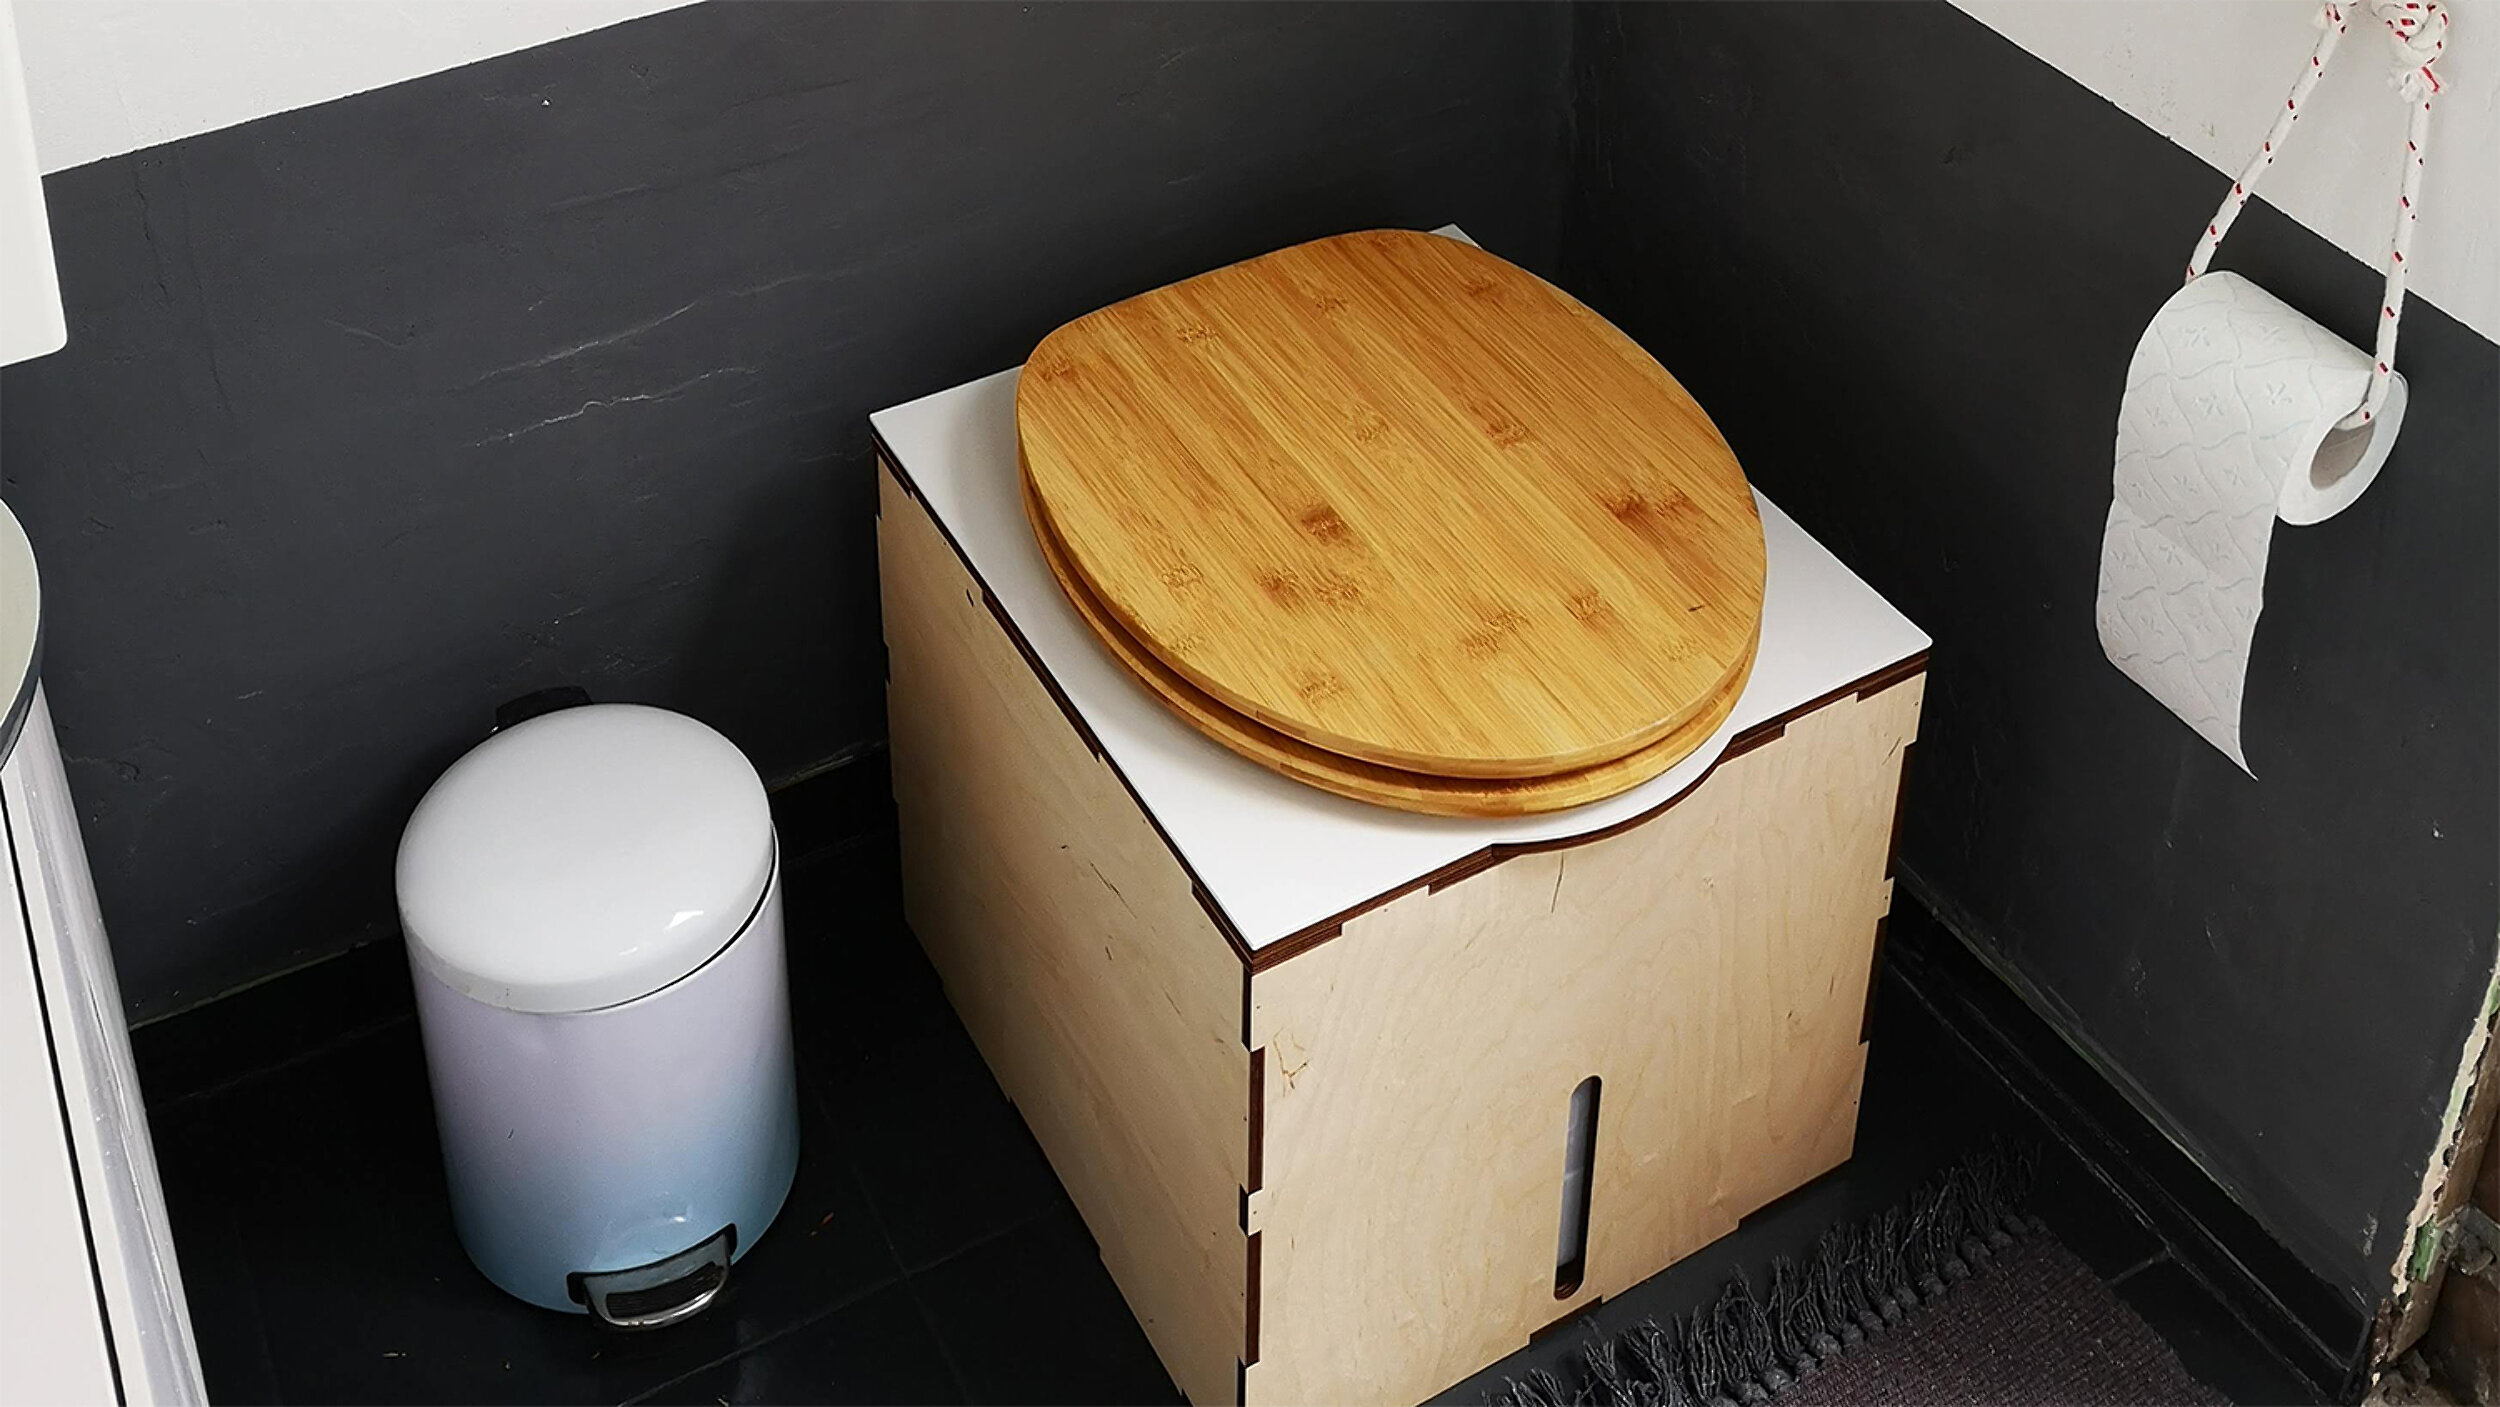 Our EasyLoo composting toilet in the bathroom